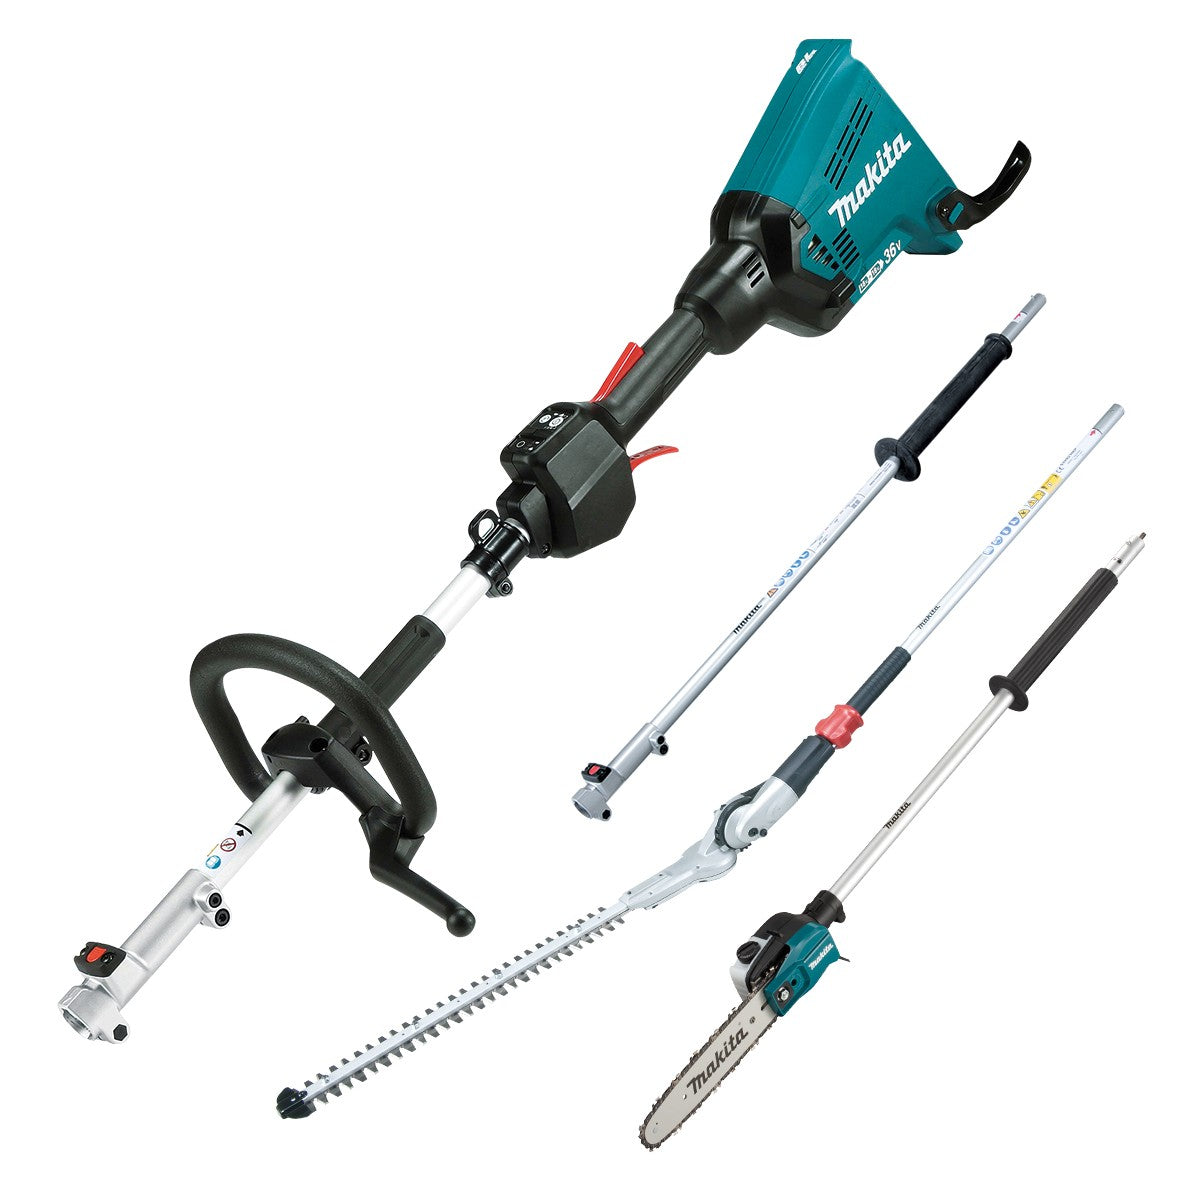 36V (18V x 2) Brushless Multi-Function Powerhead Hedge Trimmer & Pole Saw Bare (Tool Only) DUX60ZPSH by Makita